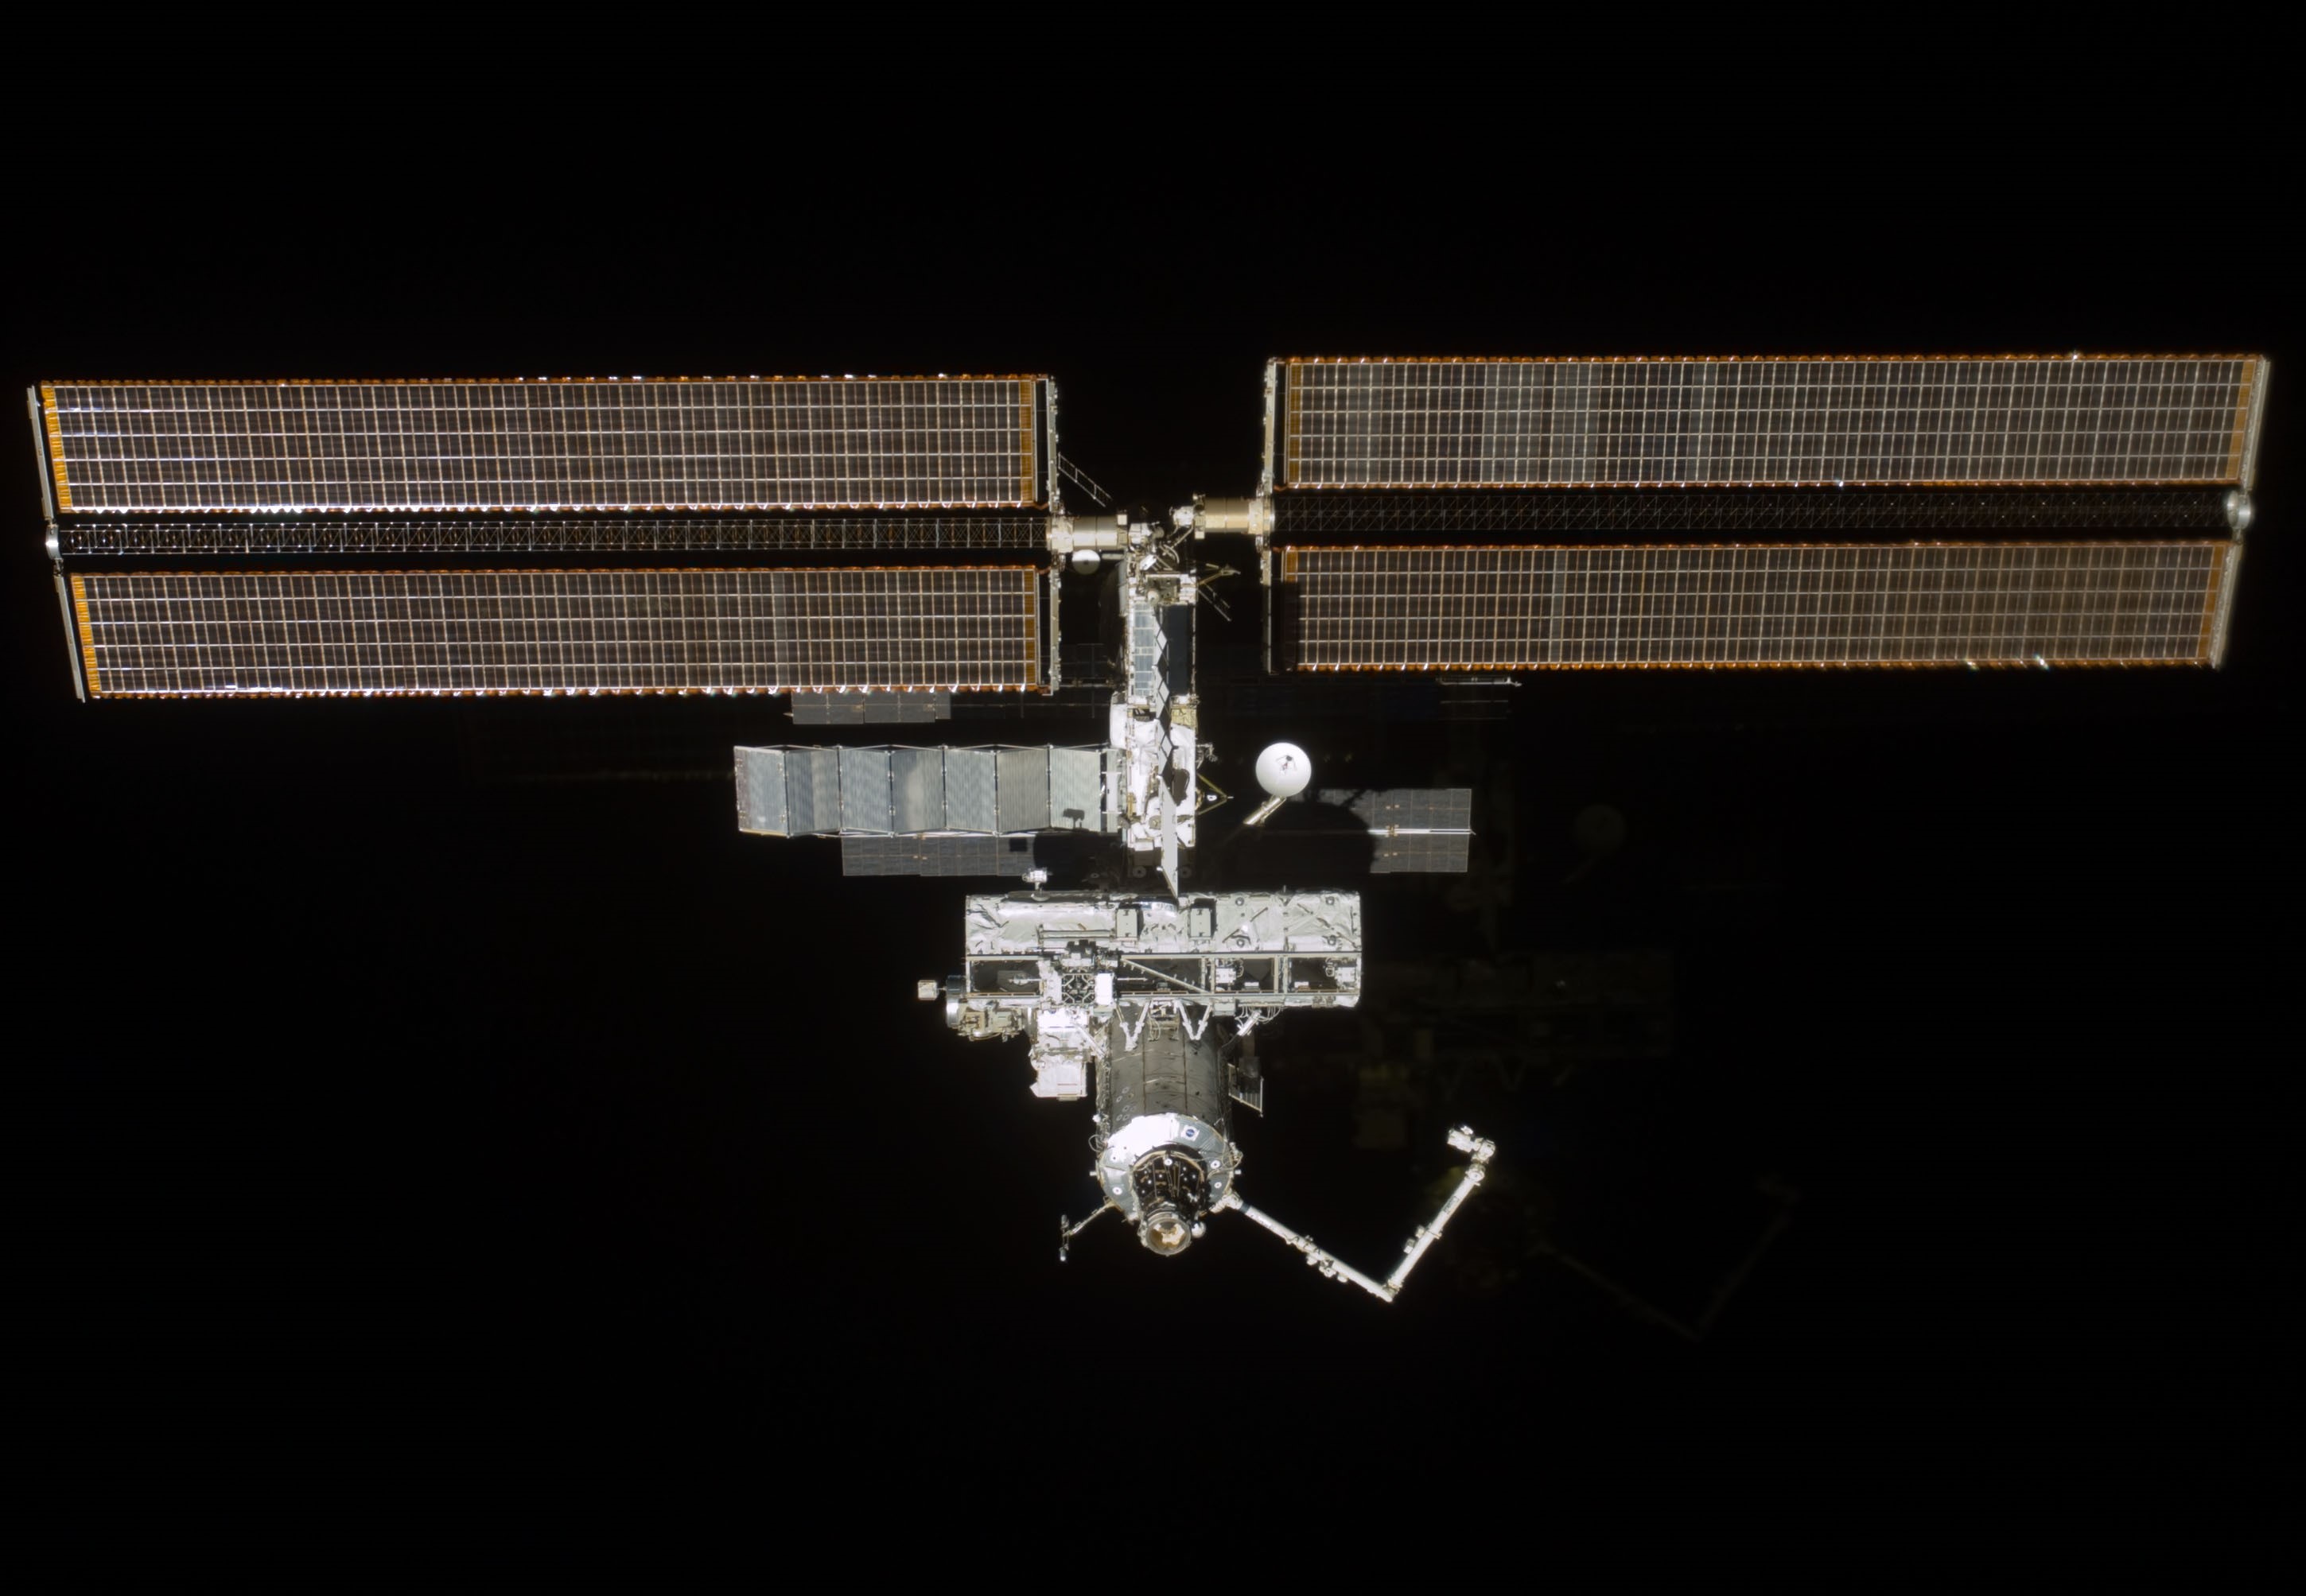 The space station as seen from the departing STS-110, showing the S0 truss mounted on Destiny